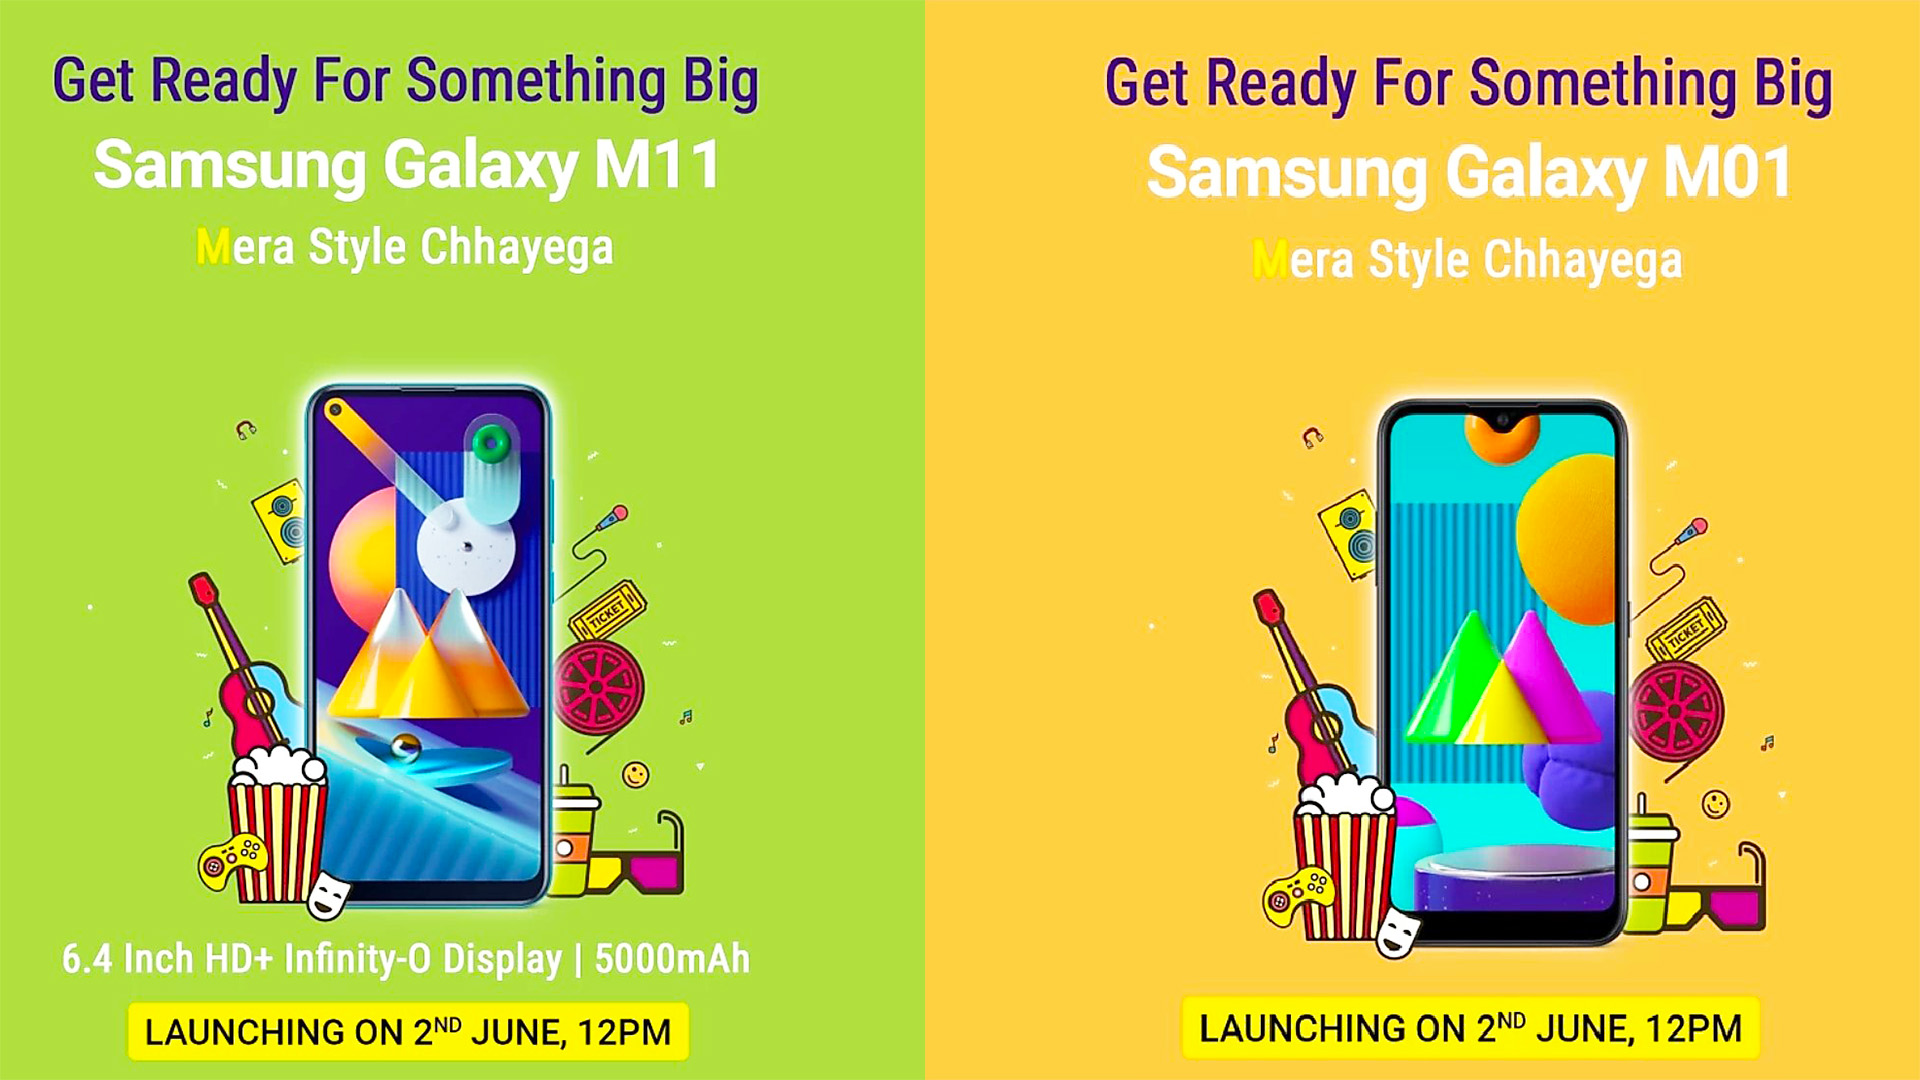 Samsung Galaxy M01 and M11 will be launched in India